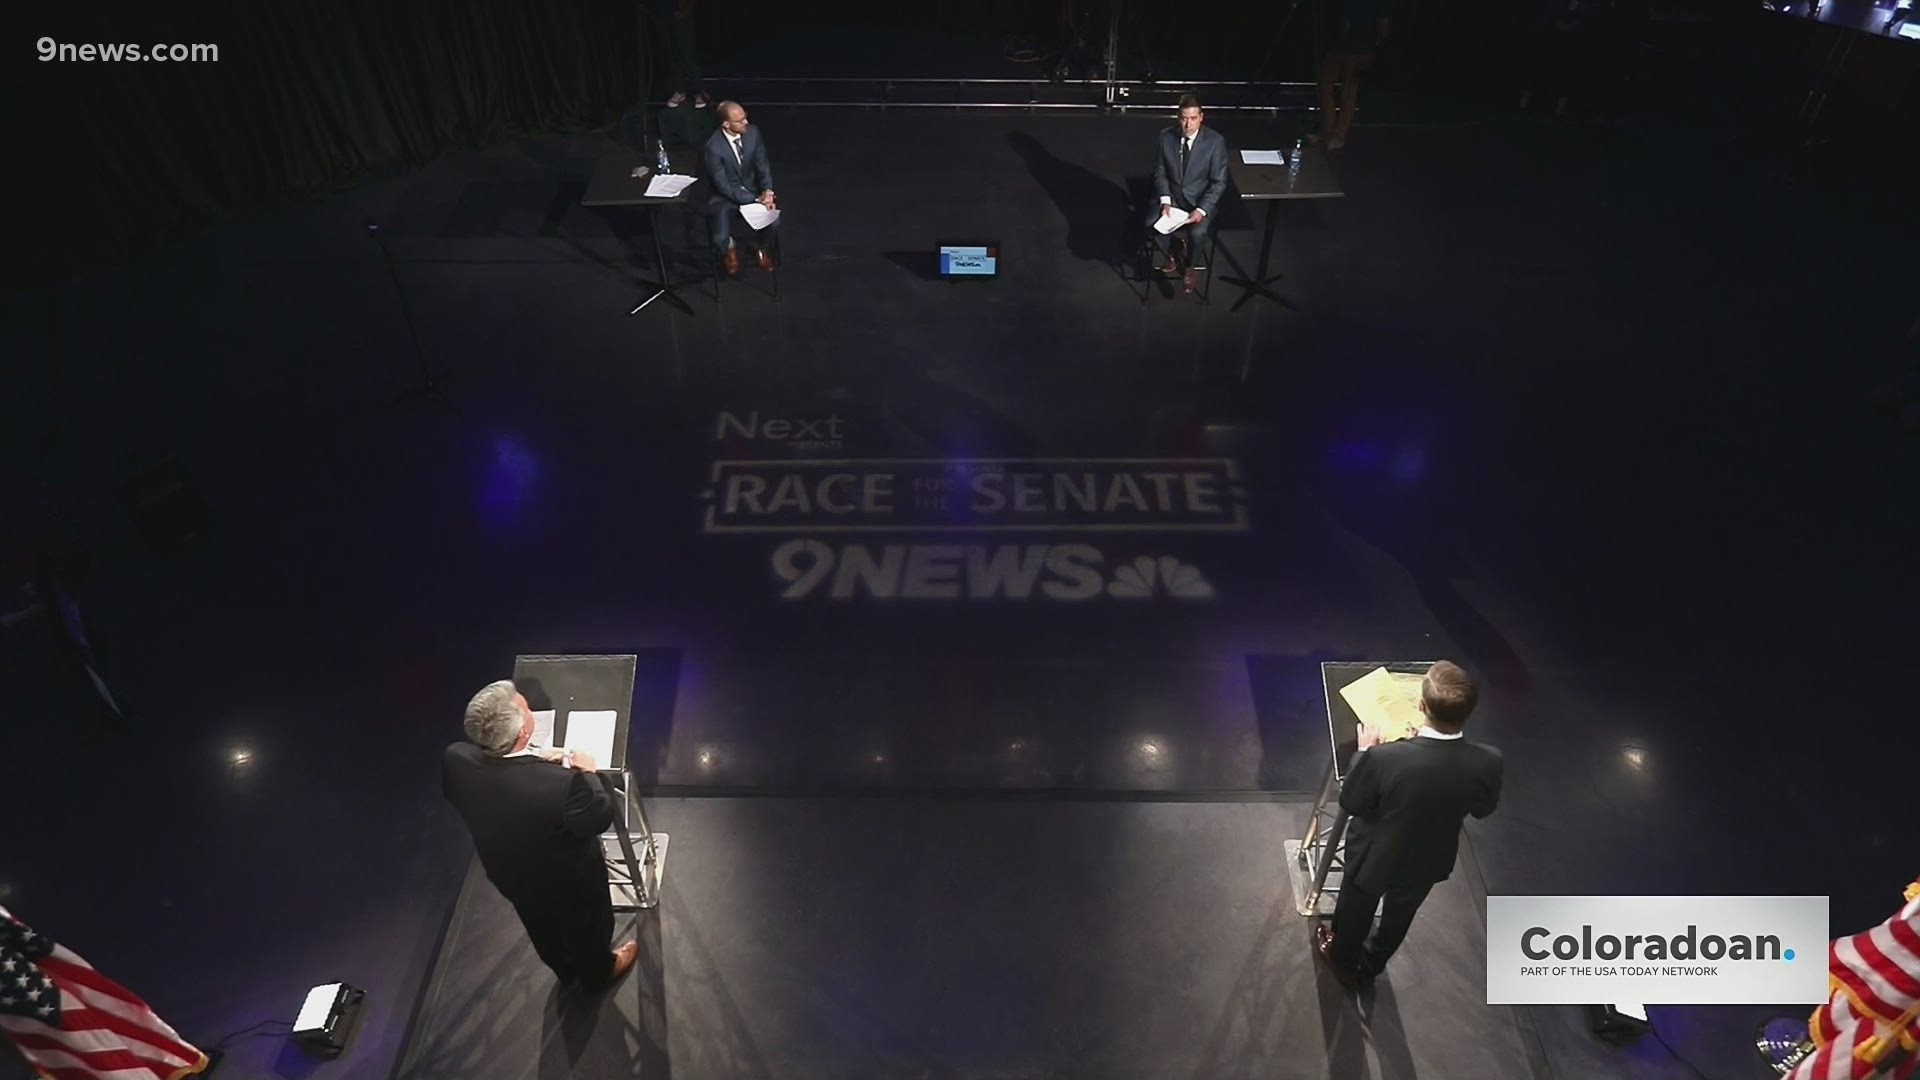 Republican incumbent Cory Gardner and Democratic challenger John Hickenlooper faced off commercial-free, statewide live debate Tuesday.